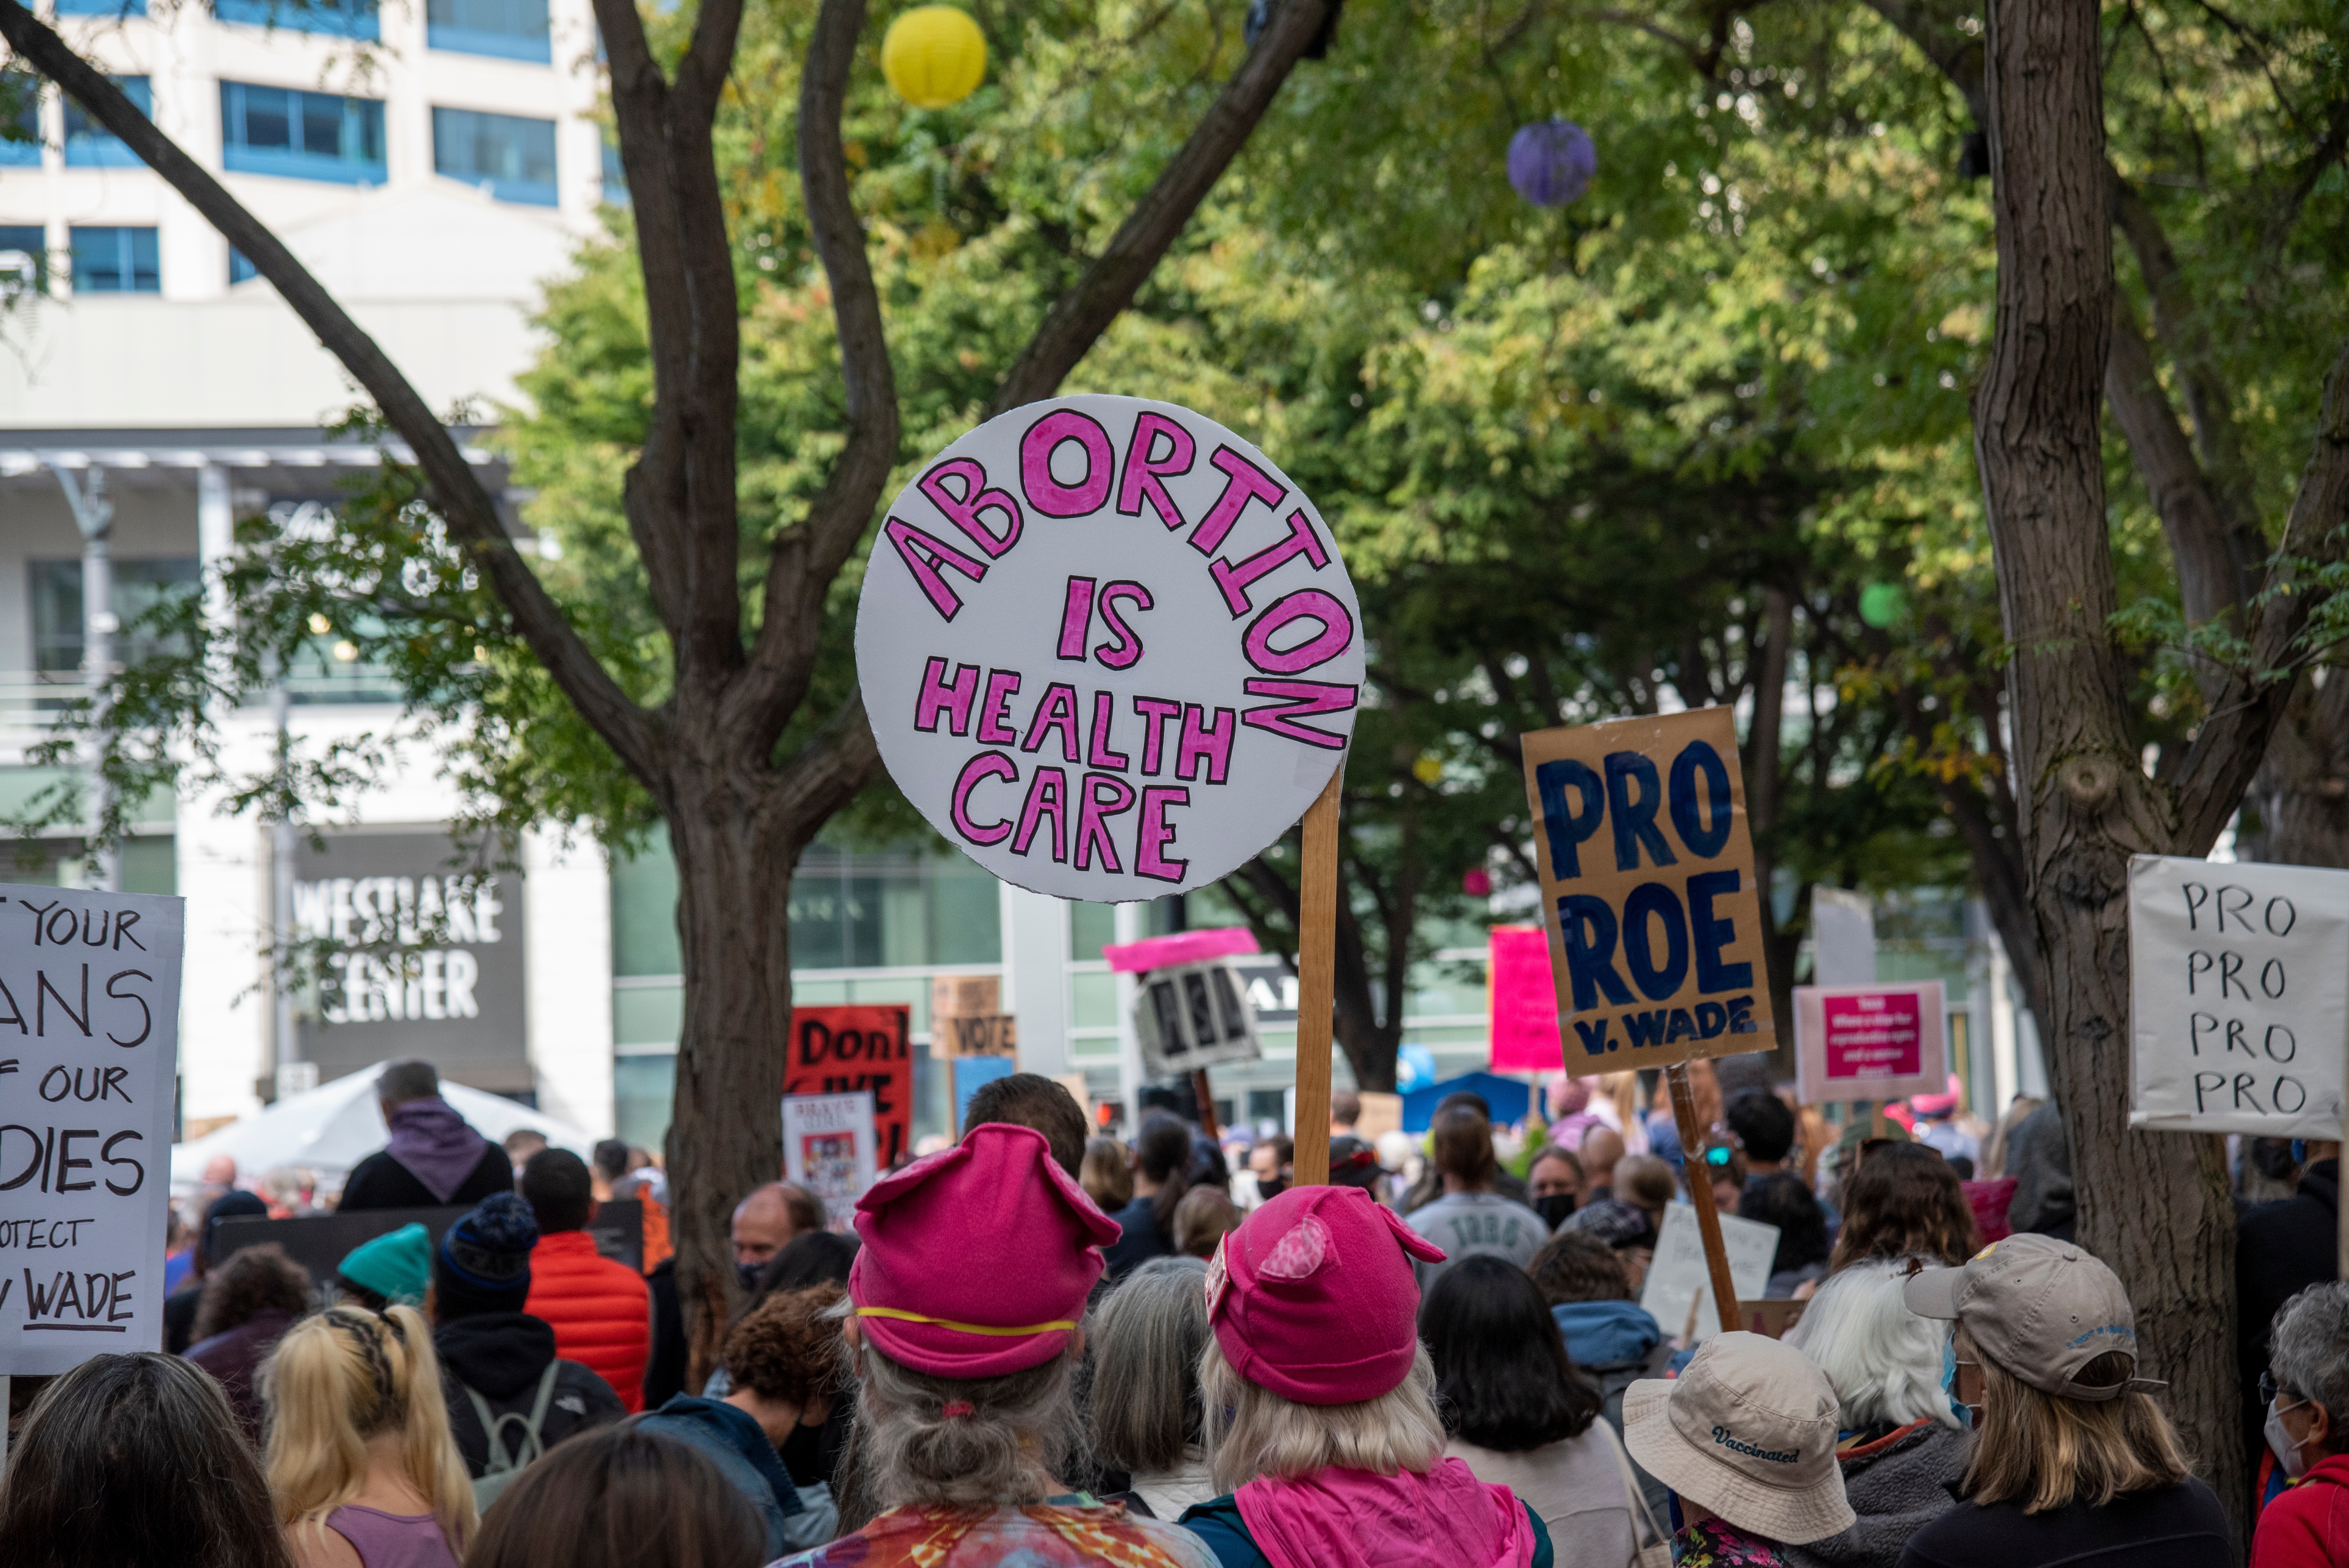 Worried About Access To Abortion Care? Here’s 4 Outstanding Orgs You Can Donate To